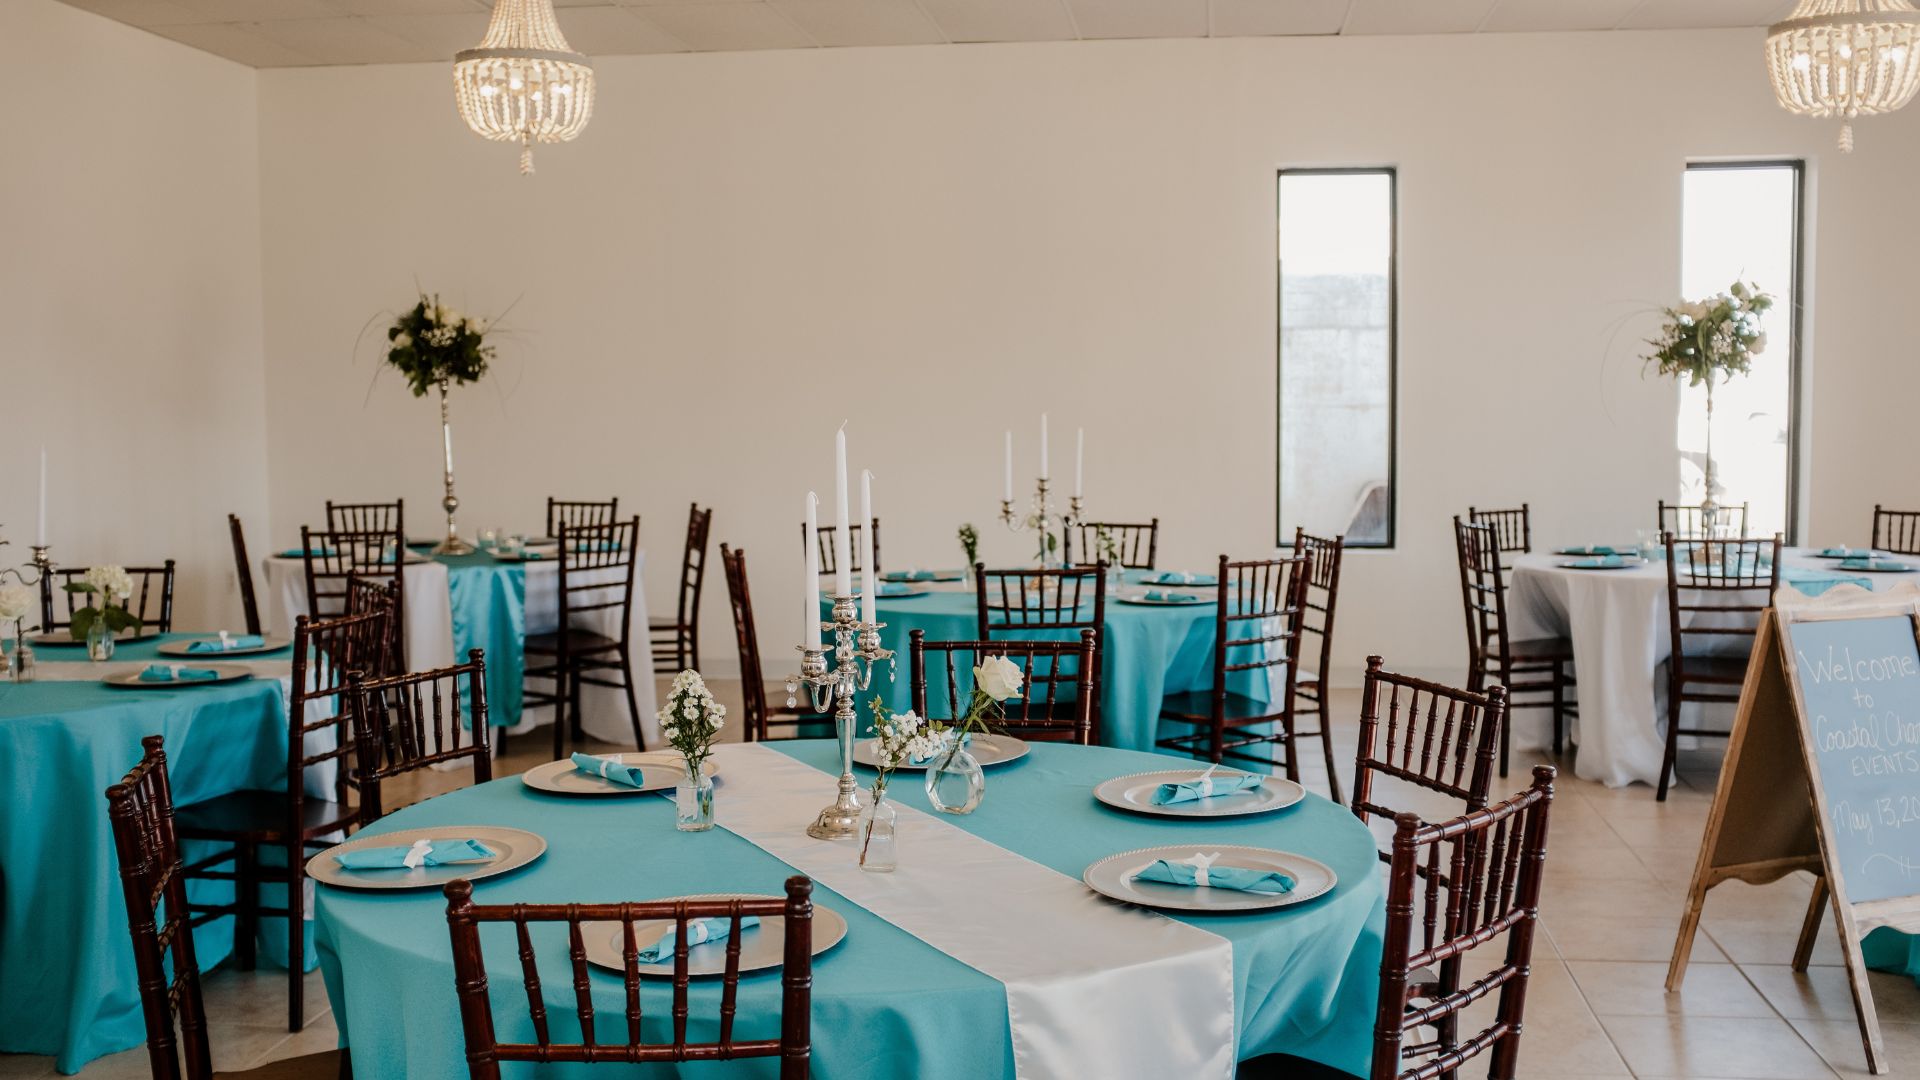 teal and white wedding reception with candelabras corpus christi wedding planner